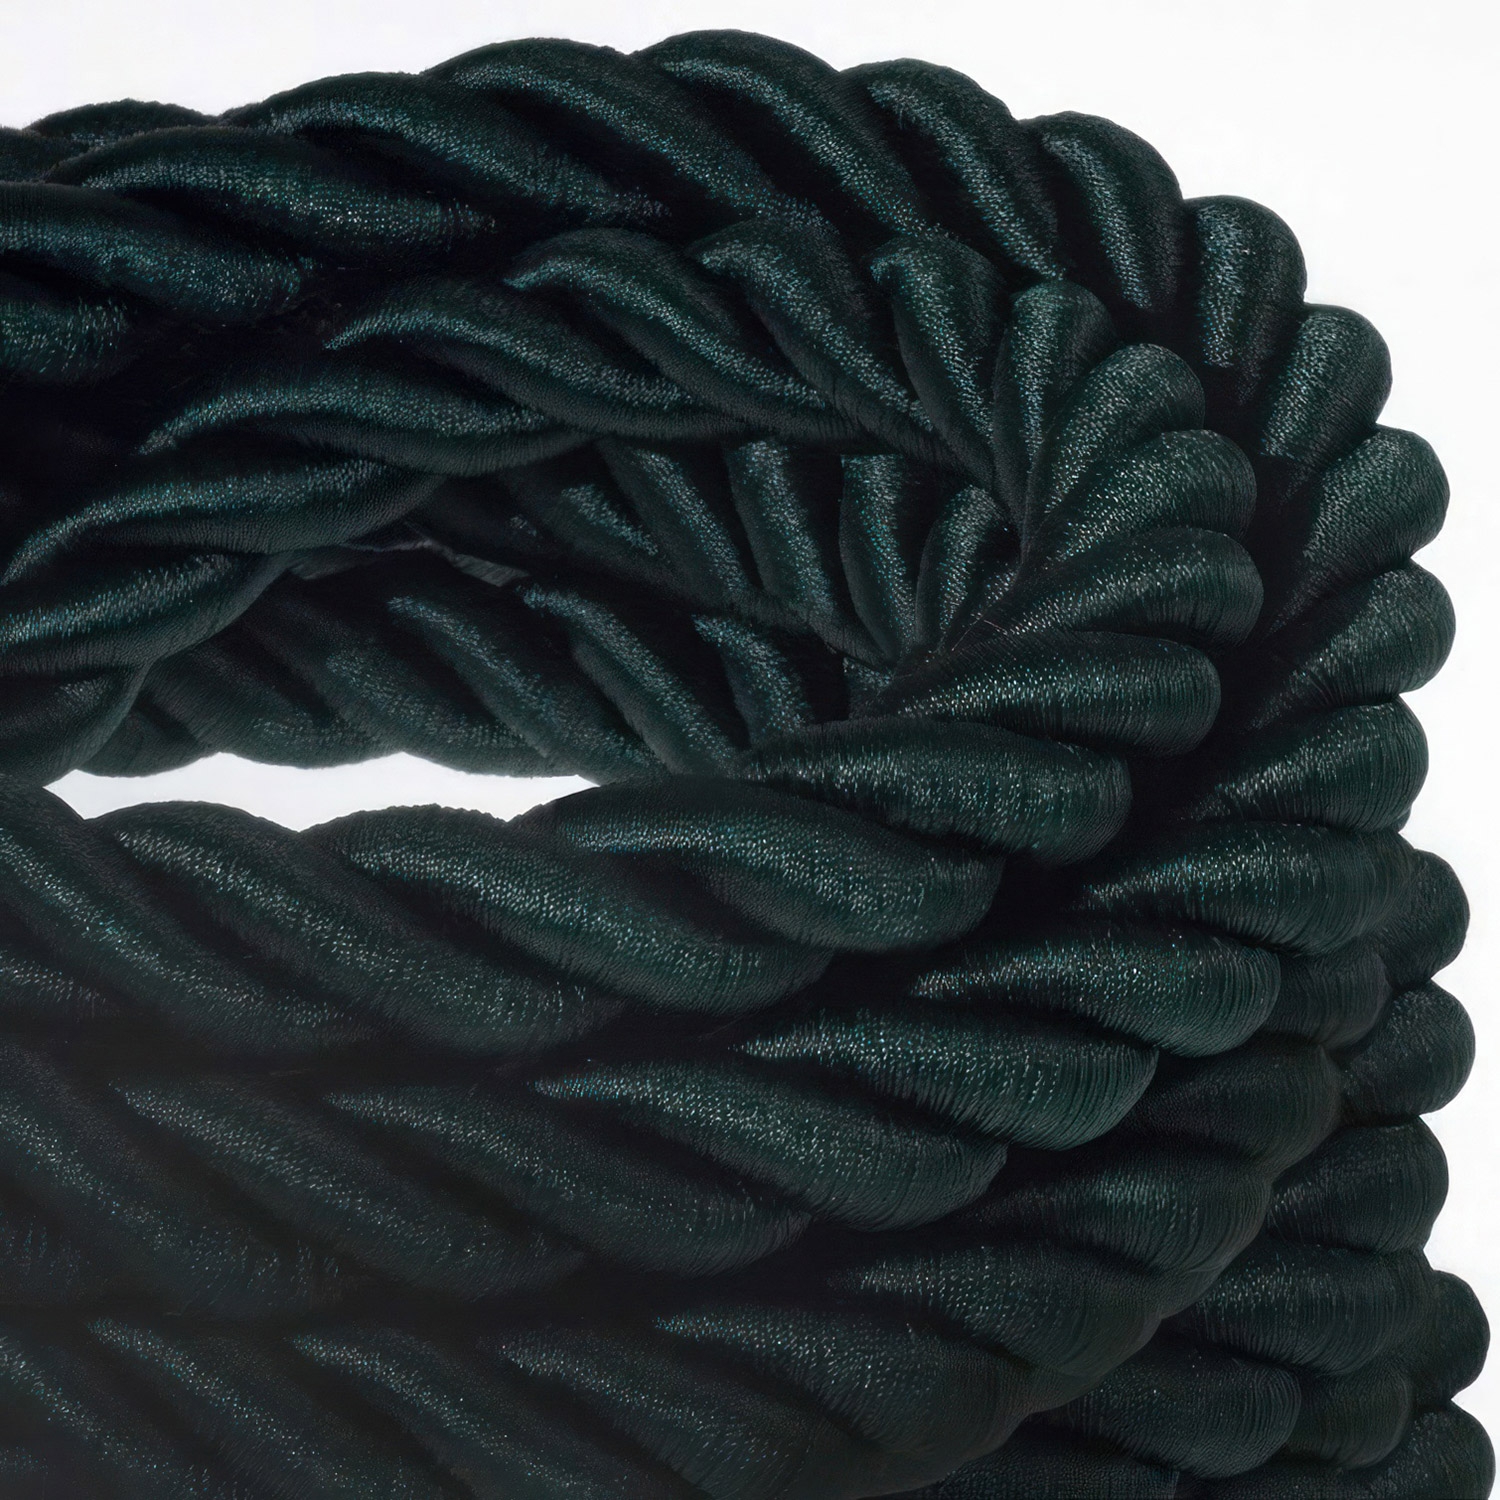 2XL Rope electrical wire 18/3 AWG wire inside. Shiny Dark Green Fabric. 24mm.